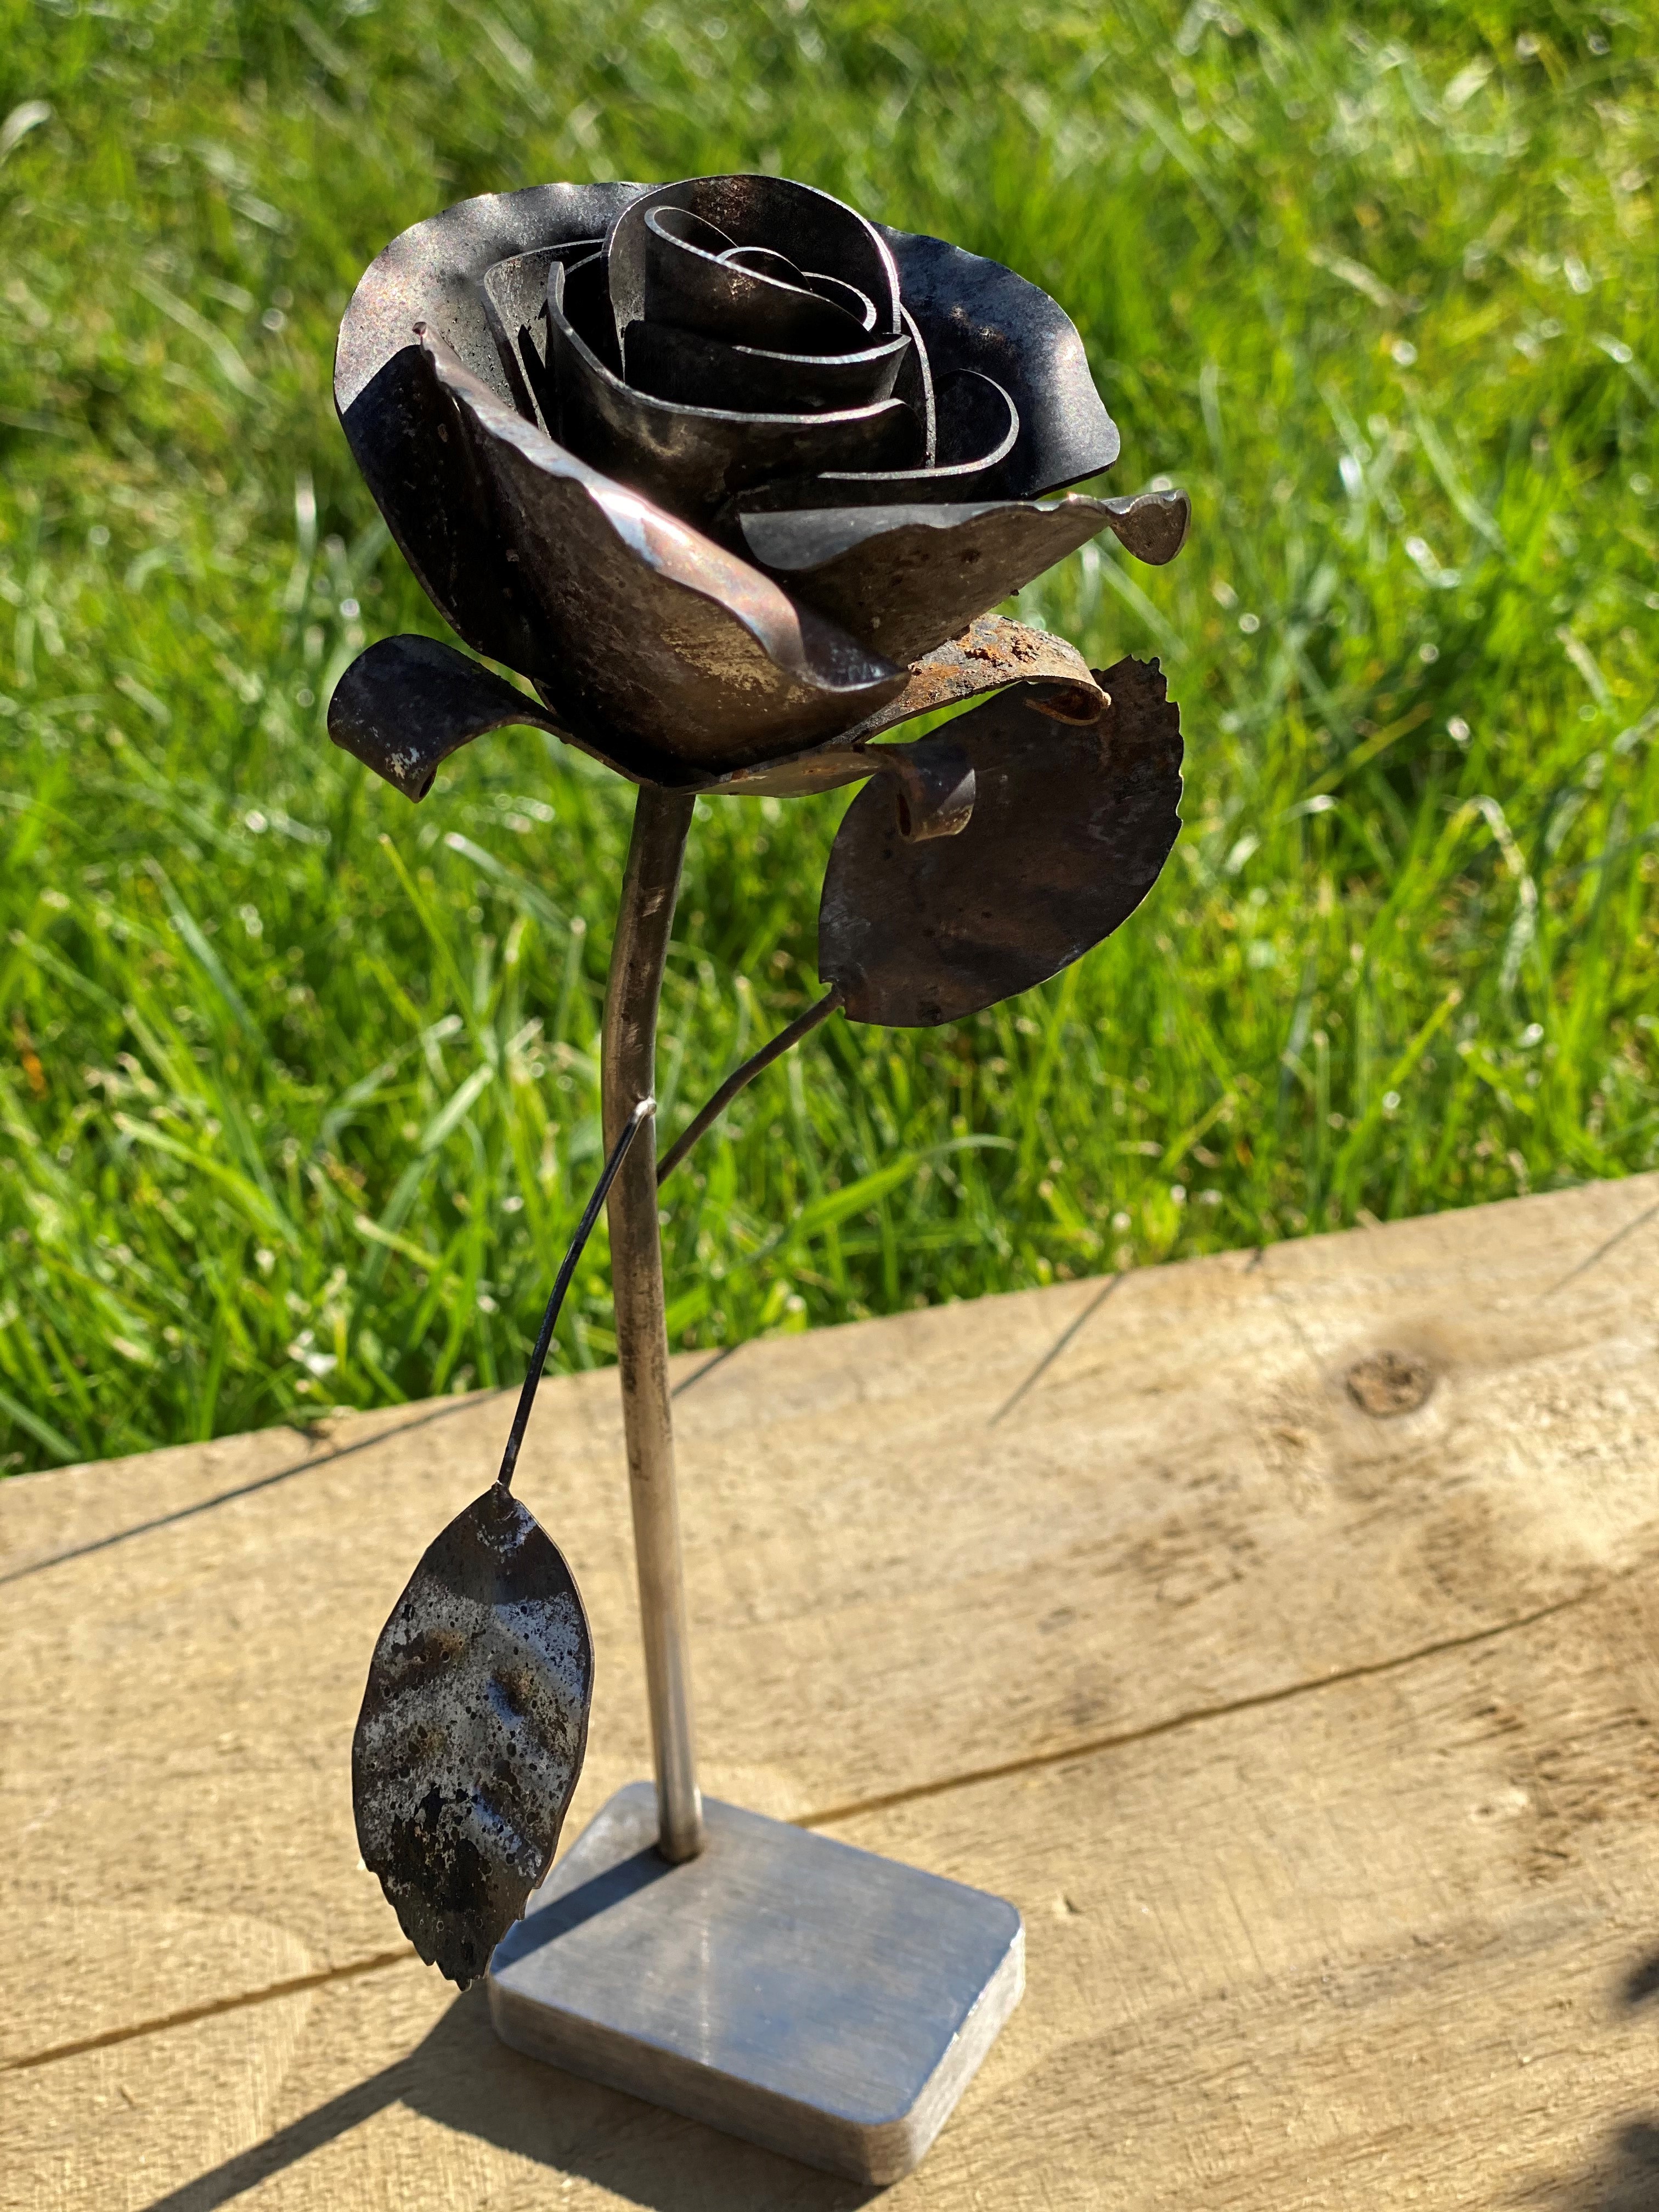 A rose ornament gifted to Jill Davies by her late husband Steve salvaged from the charred remains of their home (Submitted).